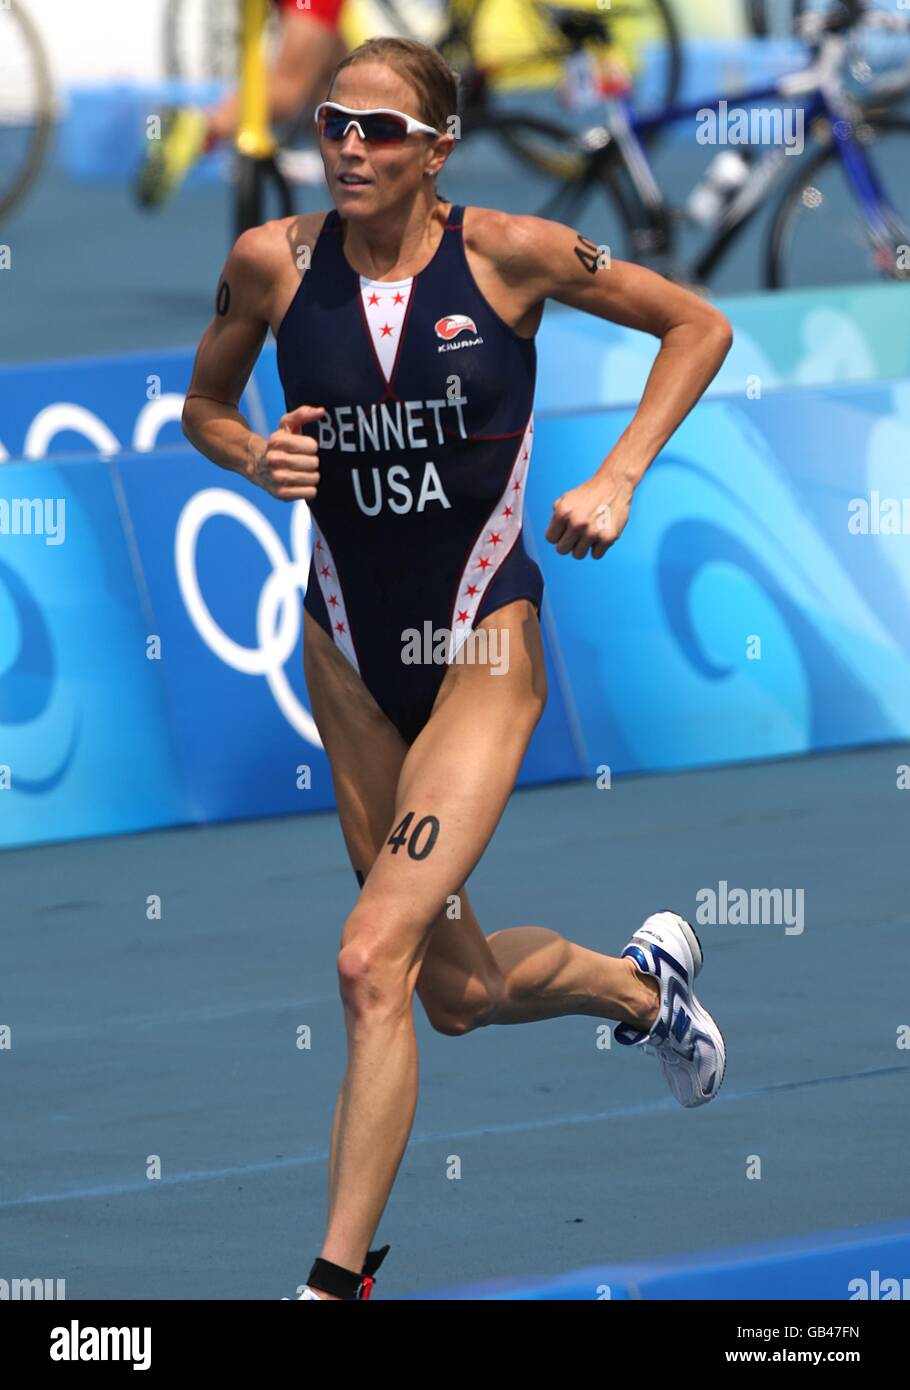 USA's Laura Bennett takes part in the running stage of the Women's Triathlon at the Ming Tomb Reservoir in Changping District of northern Beijing on day 10 of the 2008 Olympic Games in Beijing. Stock Photo